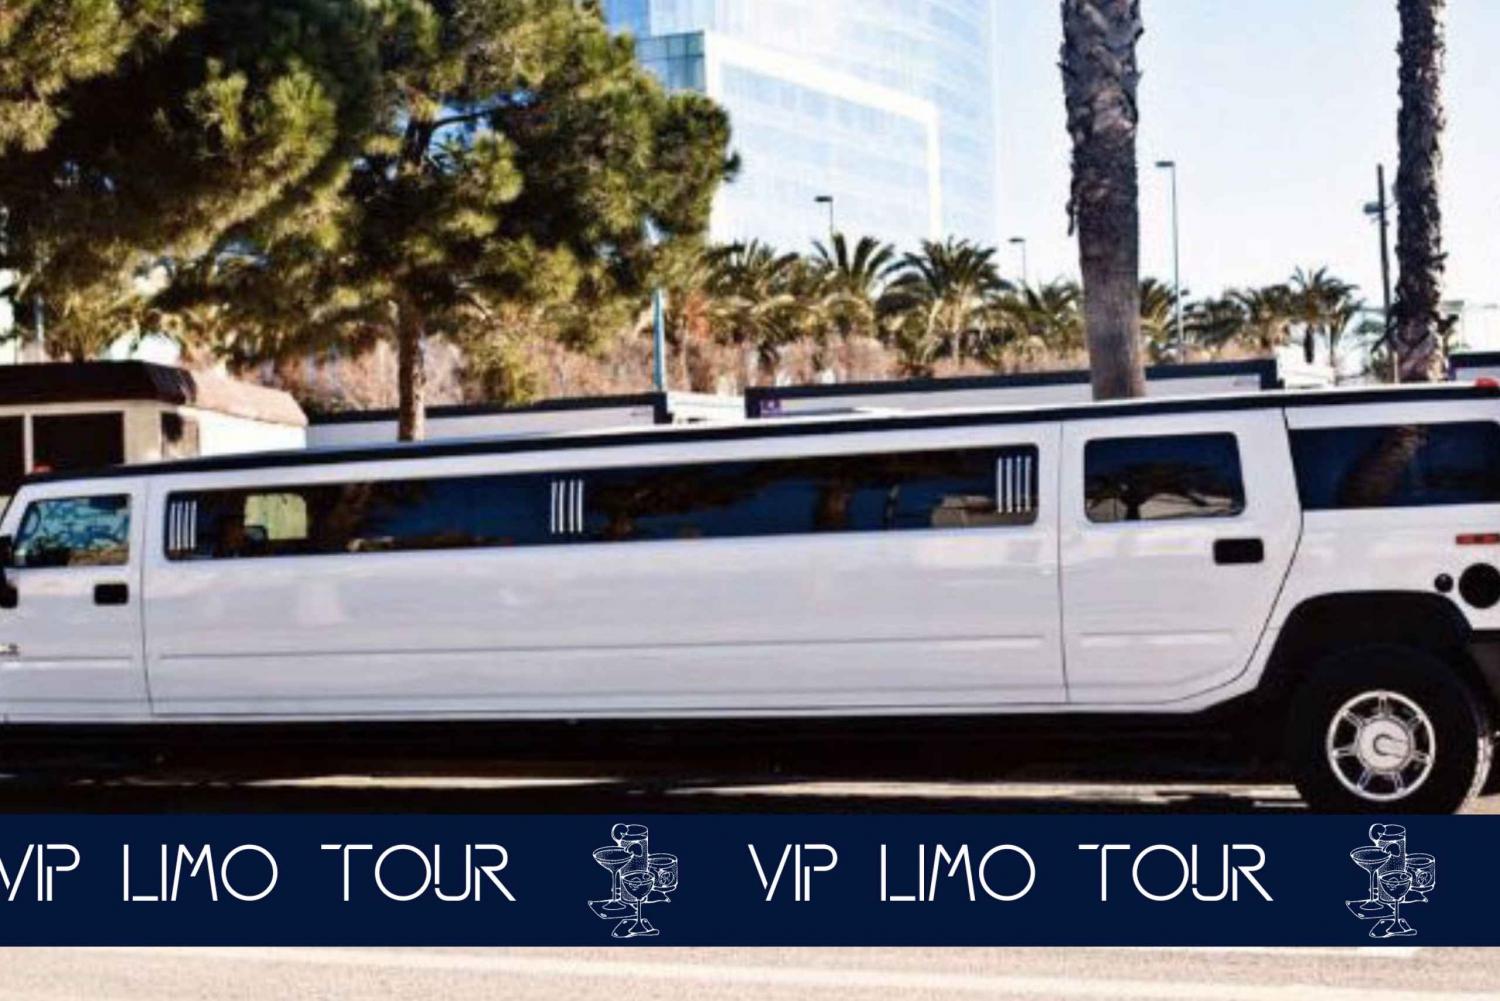 Barcelona: Limousine Ride with Drinks & Entry to Nightclub